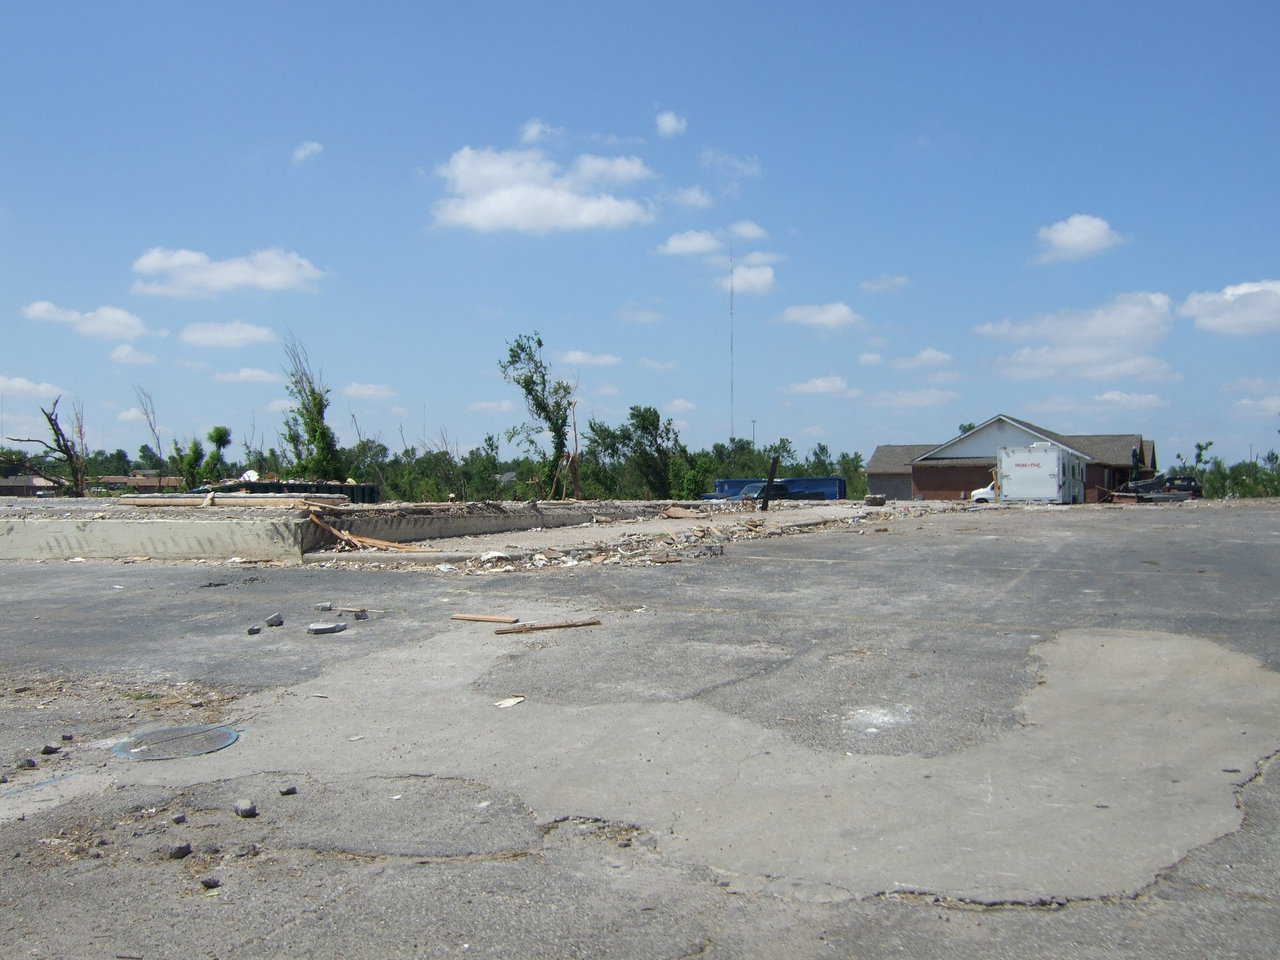 Note the concrete foundations. Unexplainably, entire blocks of homes were flattened, yet one was left virtually untouched.